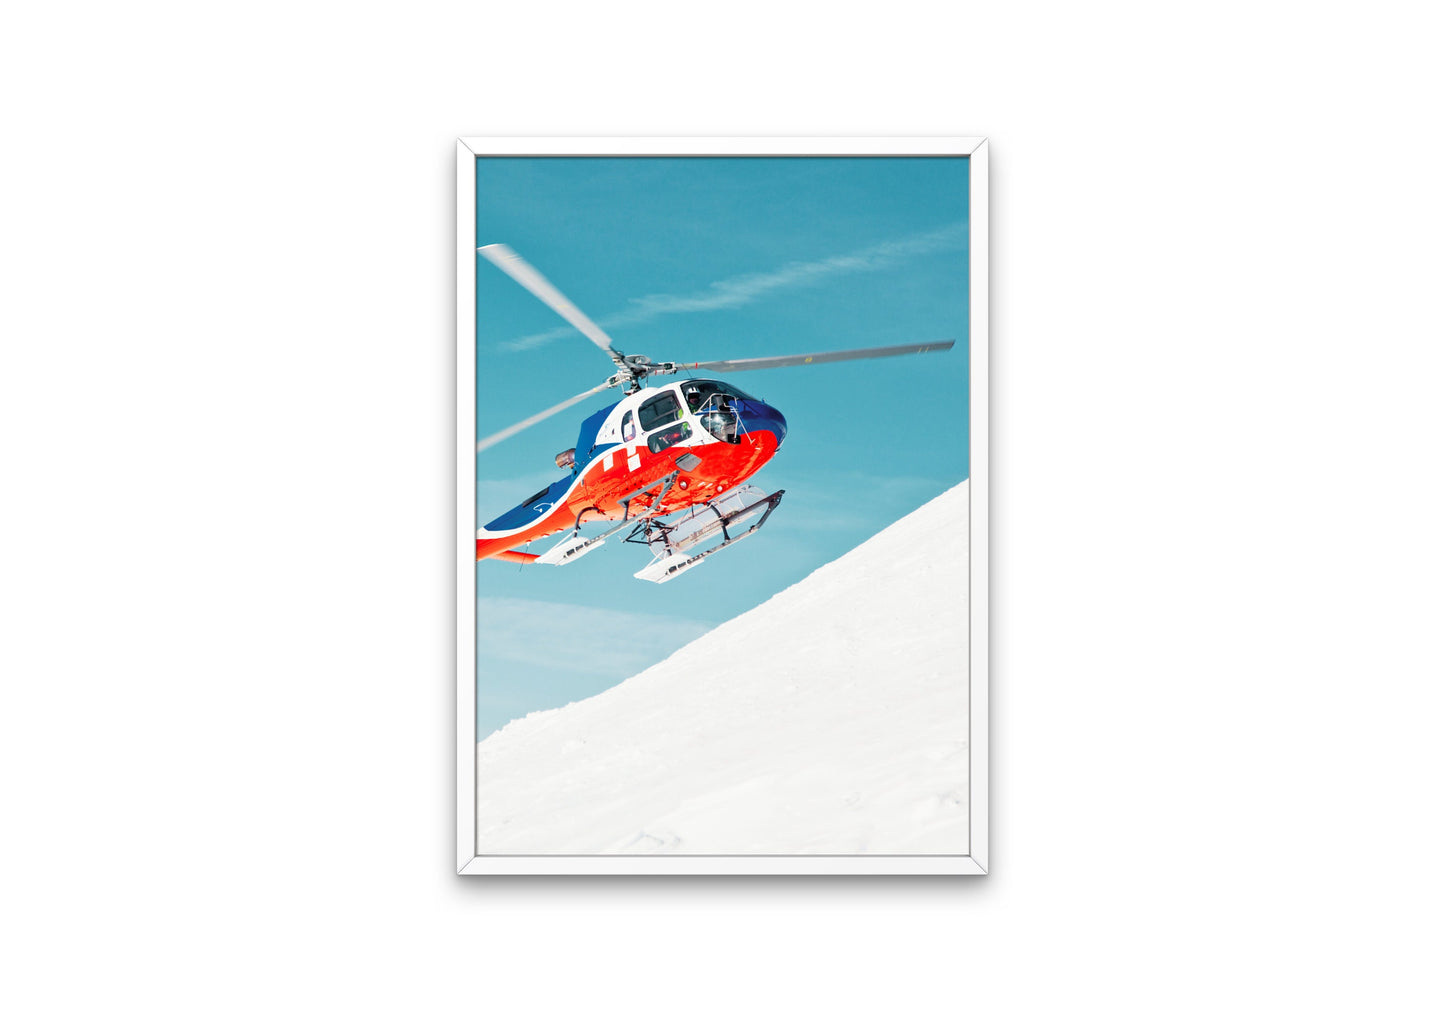 Snow Helicopter Poster DIGITAL DOWNLOAD, sport prints, sports aesthetic, ski house decor, helicopter decor, aircraft poster, ski lover gift